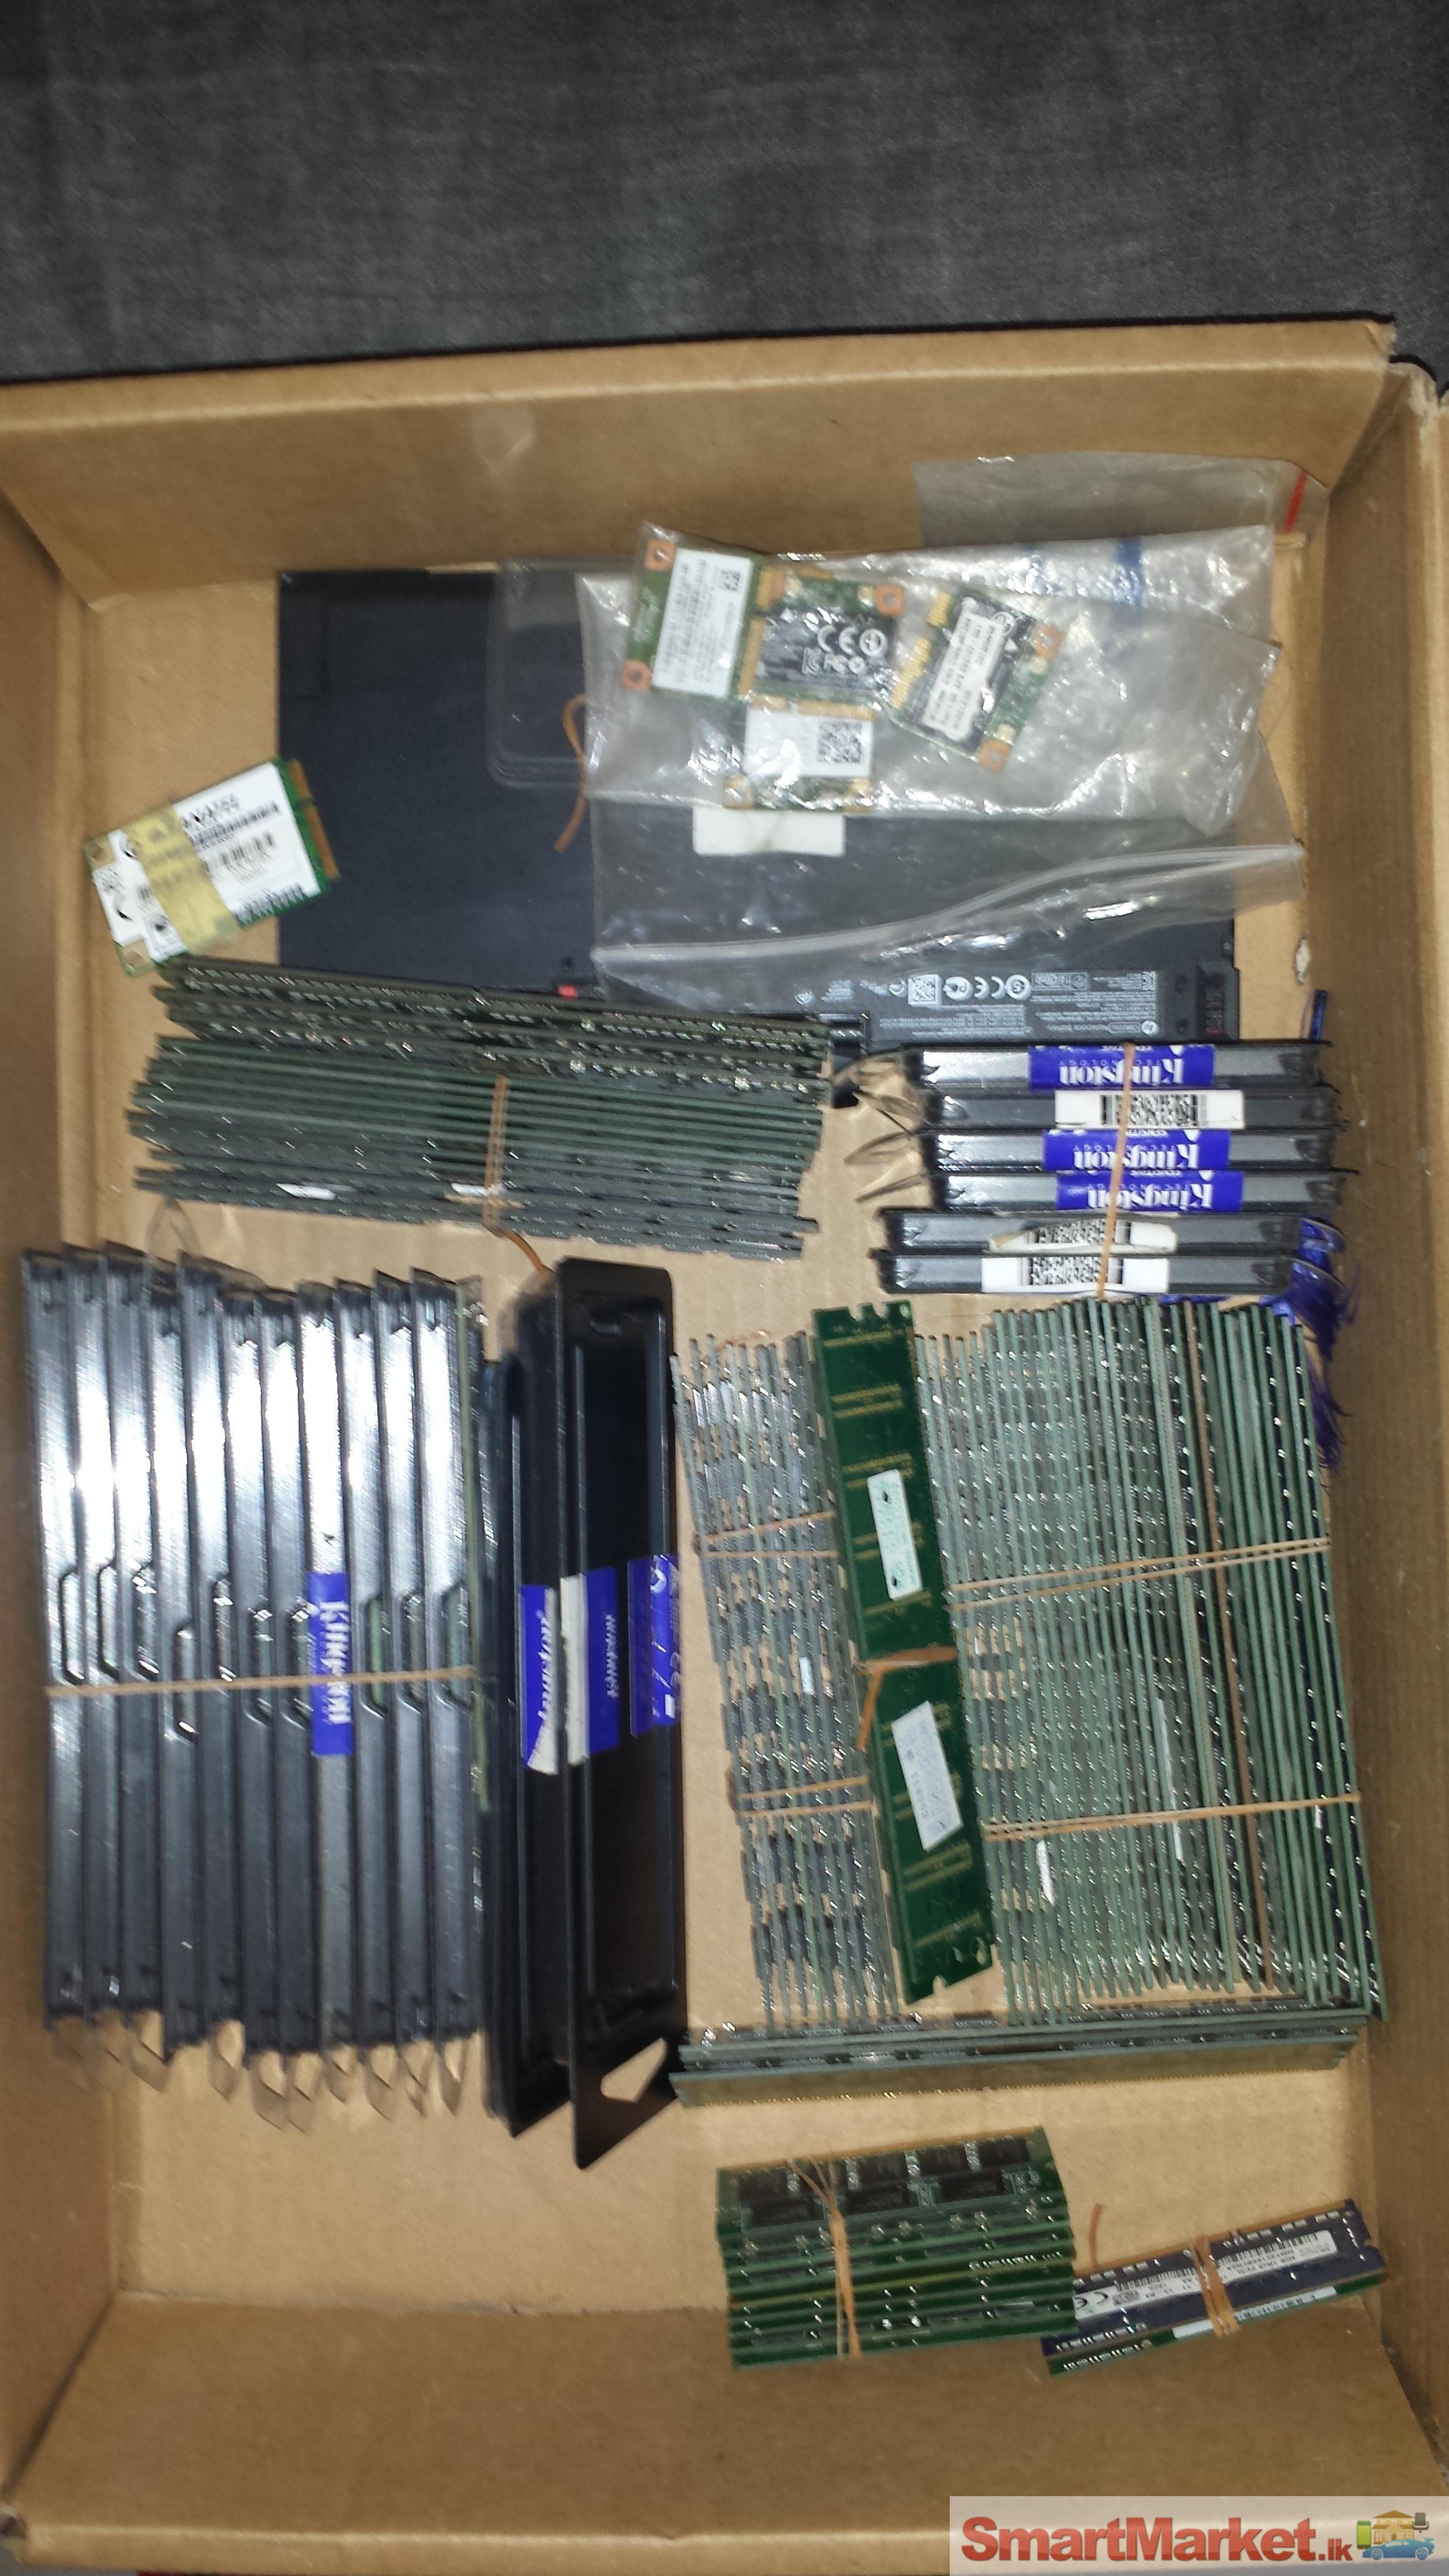 DDR3 4GB RAM for sale cash on Delivery